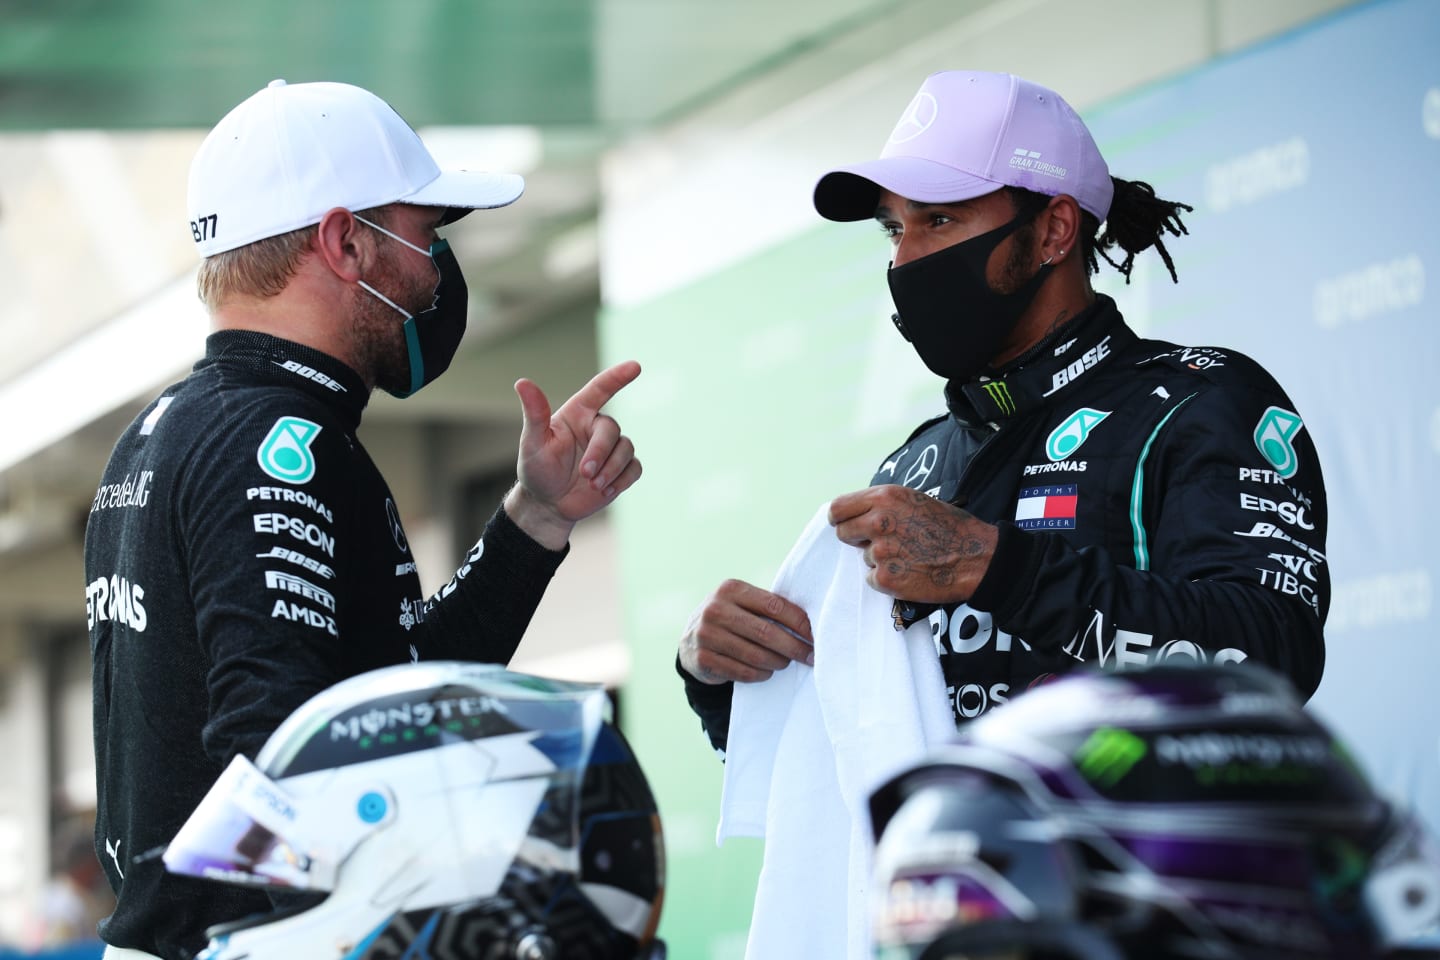 BARCELONA, SPAIN - AUGUST 15: Pole position qualifier Lewis Hamilton of Great Britain and Mercedes GP talks to second placed qualifier Valtteri Bottas of Finland and Mercedes GP during qualifying for the F1 Grand Prix of Spain at Circuit de Barcelona-Catalunya on August 15, 2020 in Barcelona, Spain. (Photo by Albert Gea/Pool via Getty Images)